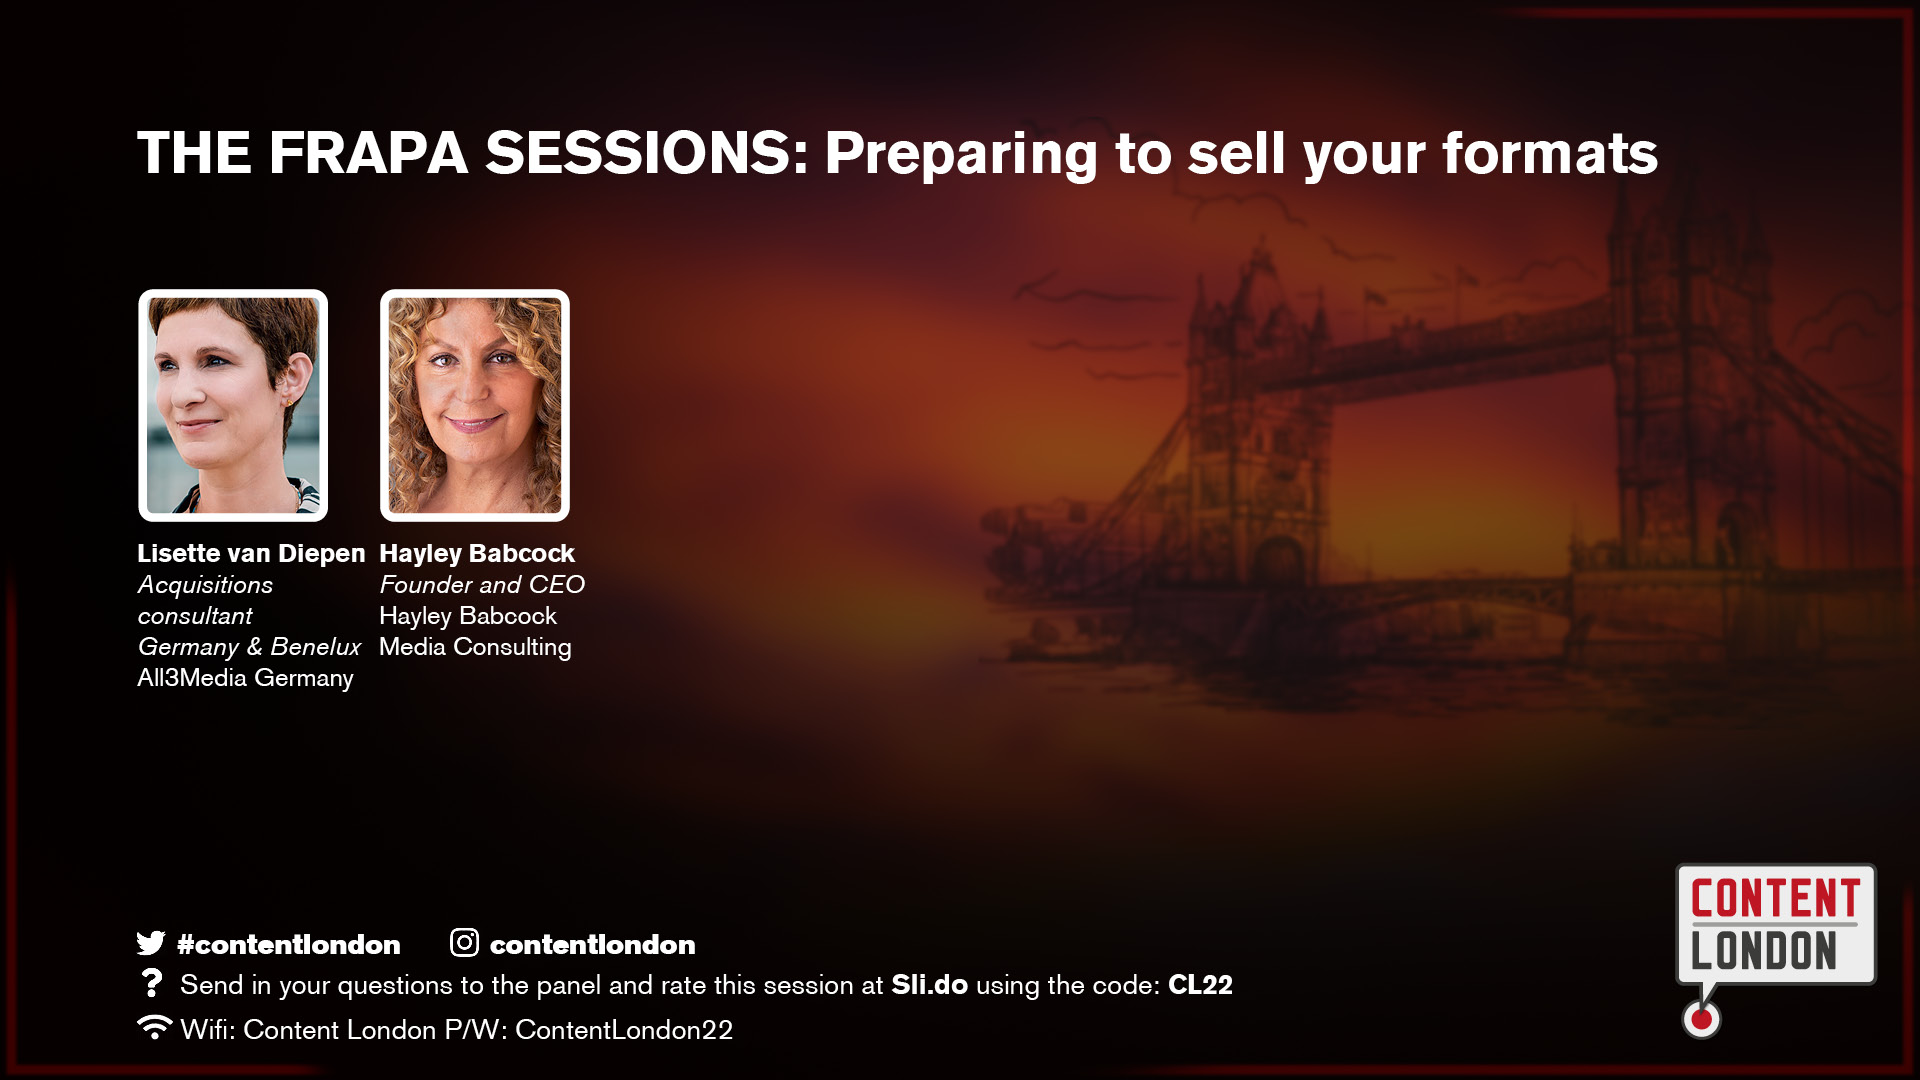 THE FRAPA SESSIONS: Preparing to sell your formats